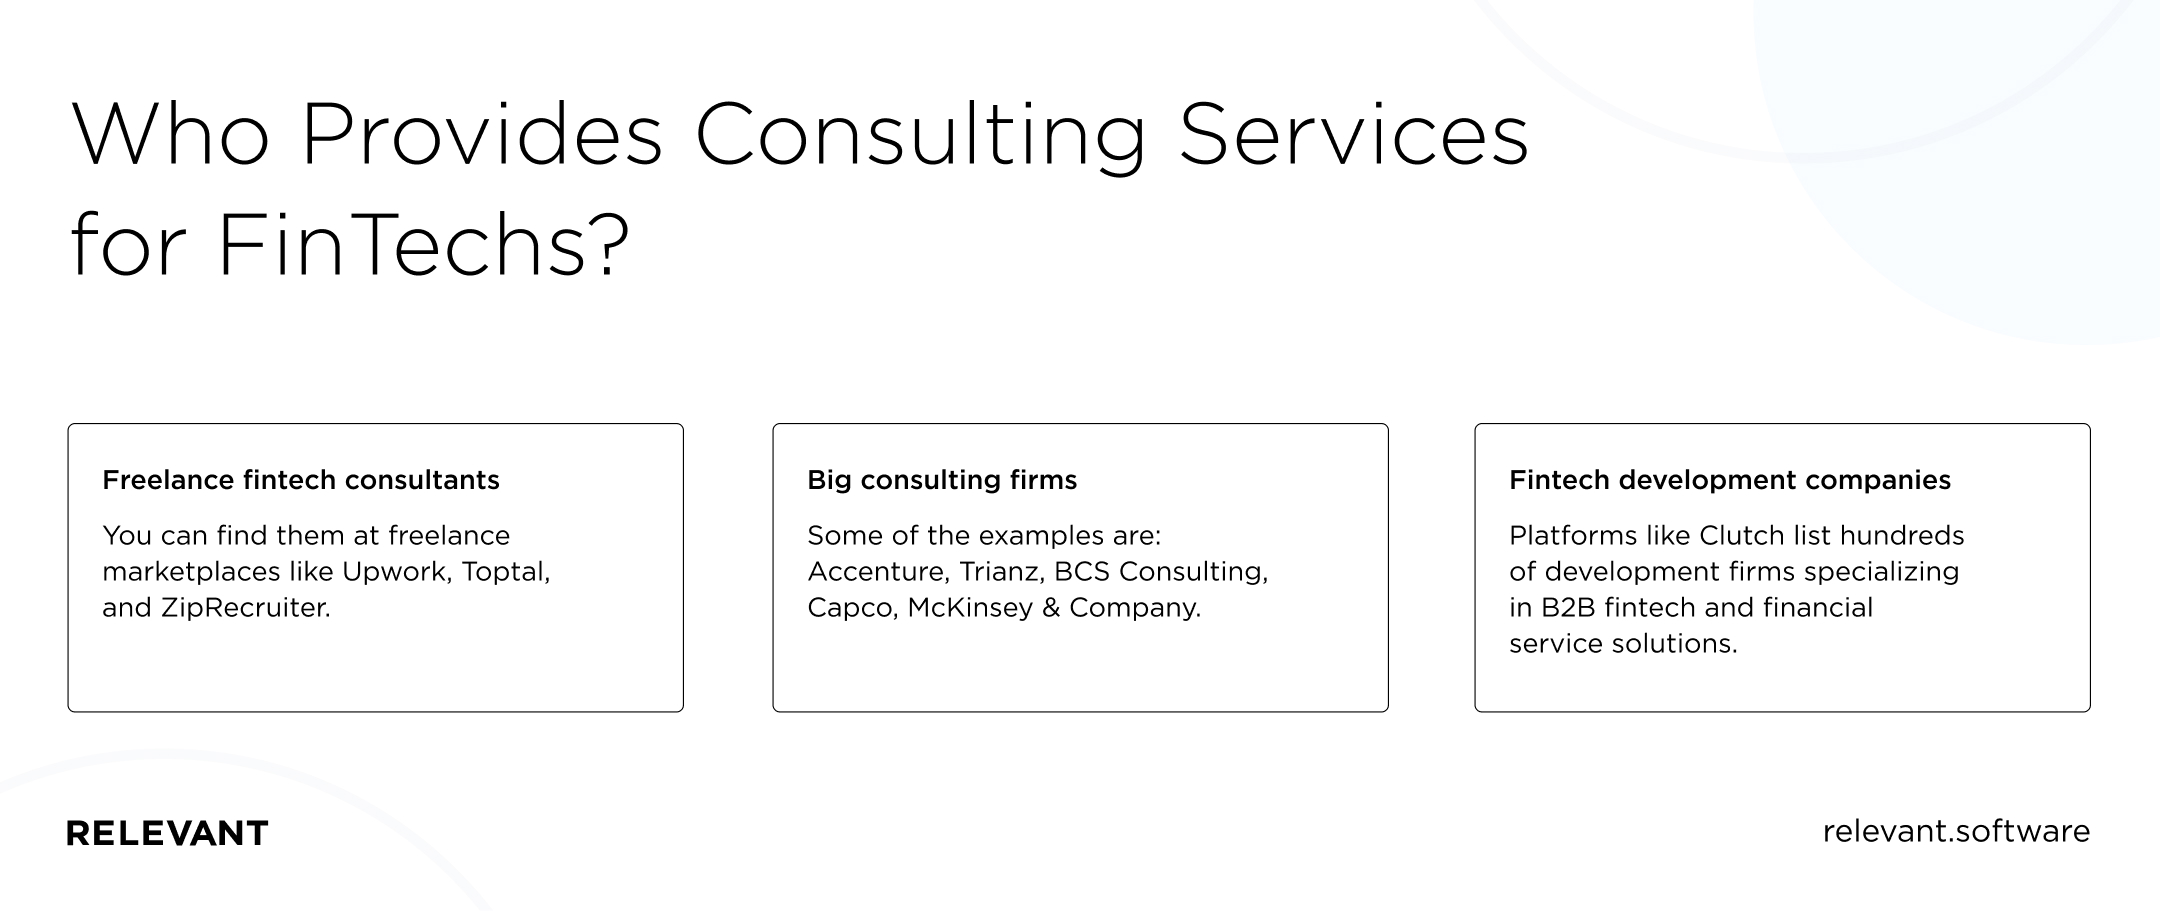 Who Provides Consulting Services for FinTechs?